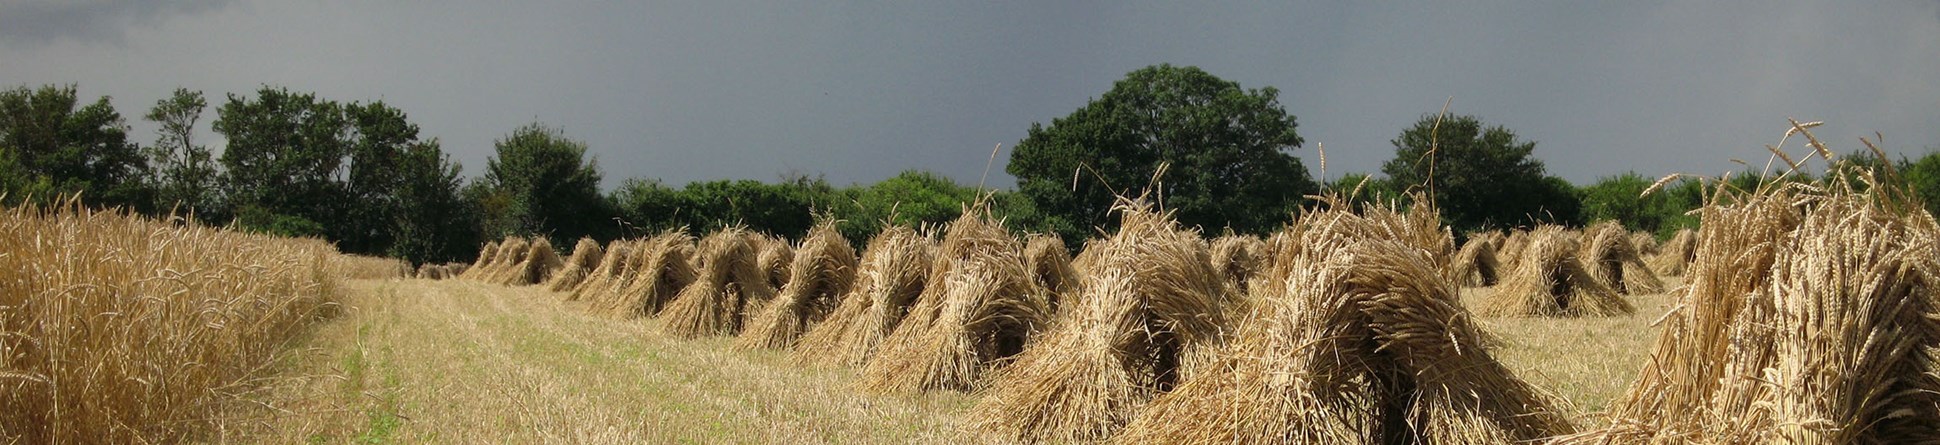 Sheaves of straw for use in thatched buildings